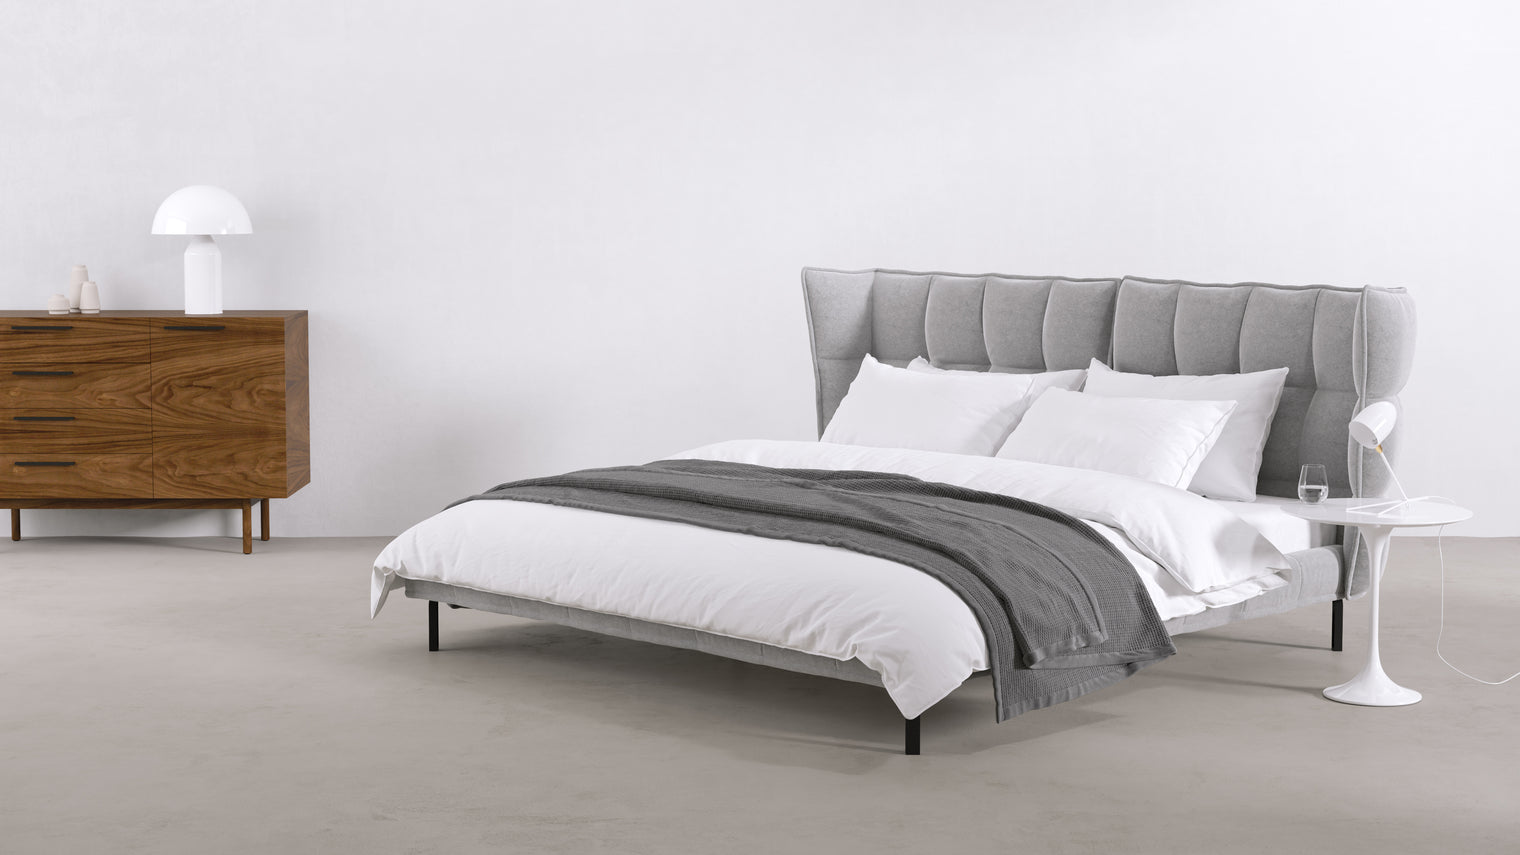 Designed for Stylish Sleeping | This statement bed is bursting with personality and flair, a great choice for those who believe that functionality and great aesthetics should always go together.
